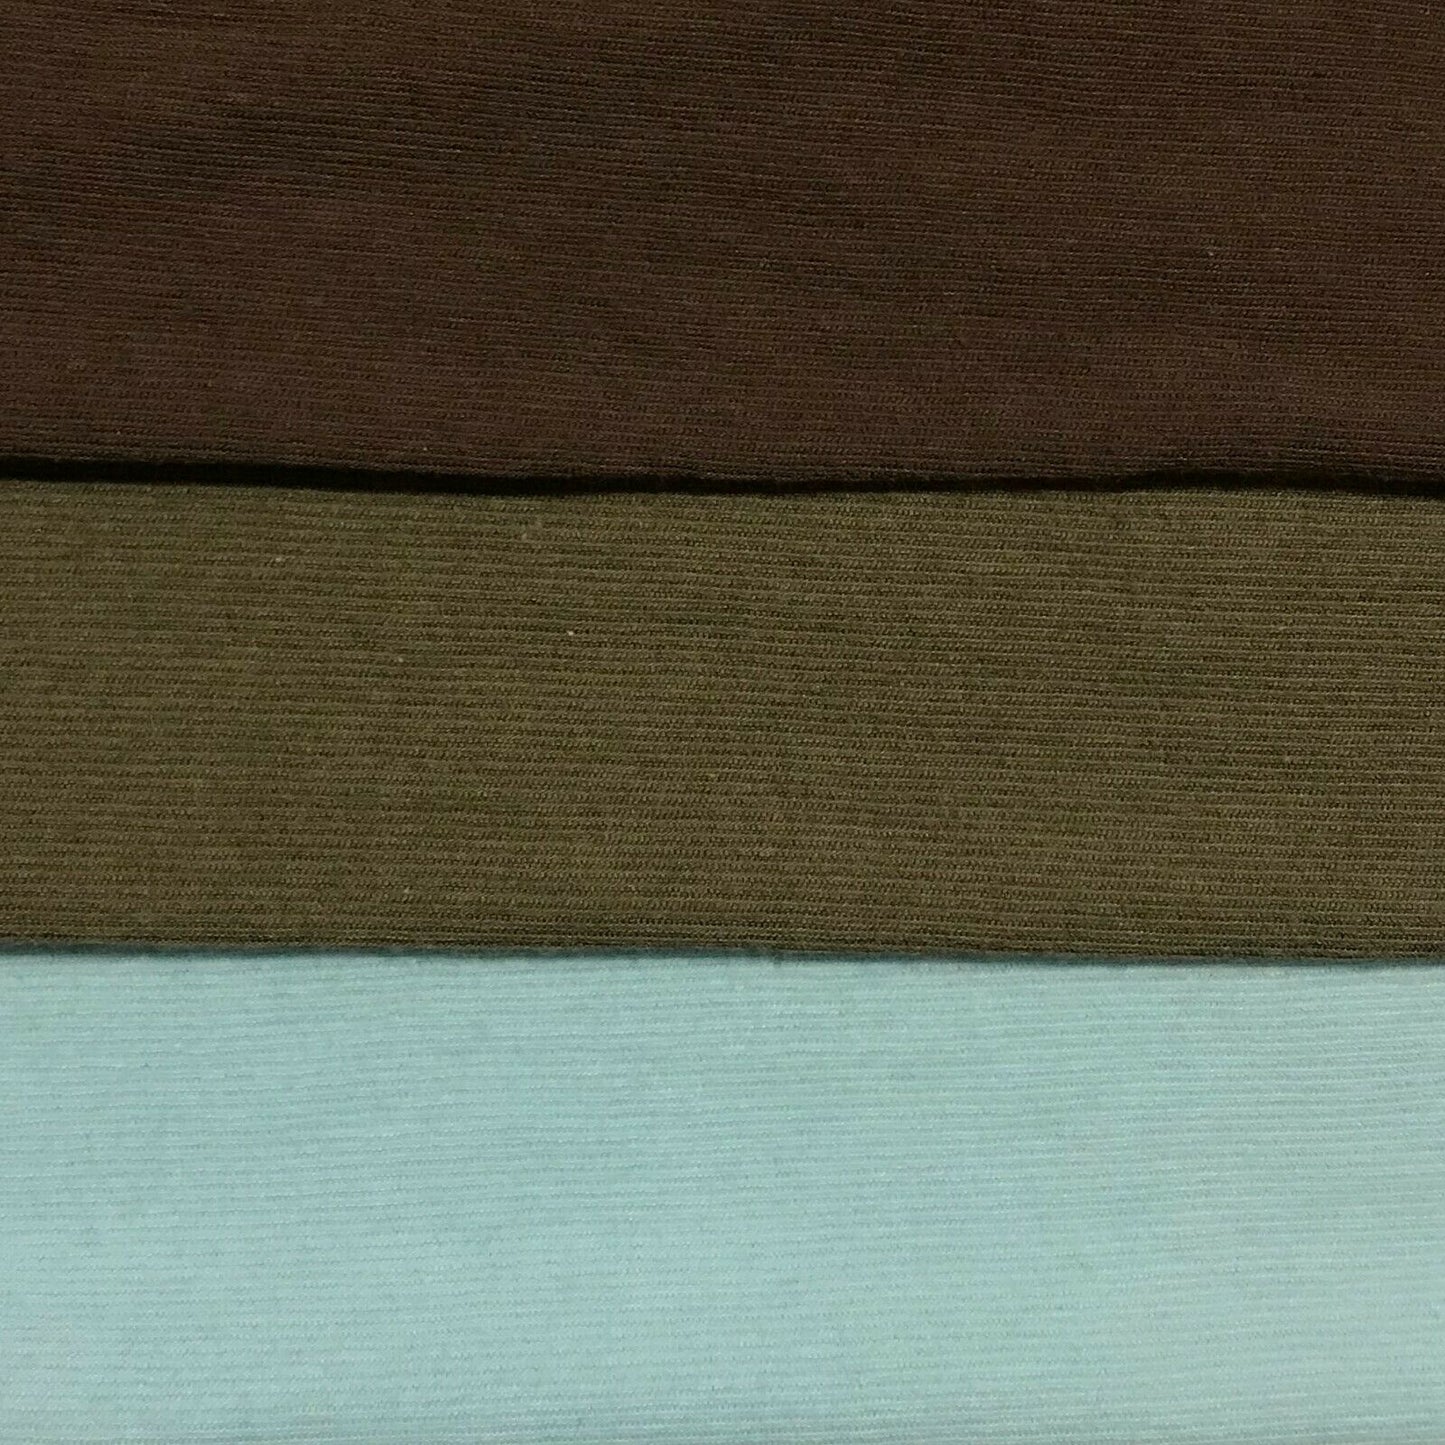 Cotton Lycra Jersey Fabric Thin 4-Way Stretch 43" Wide Sold By The Metre A1-185